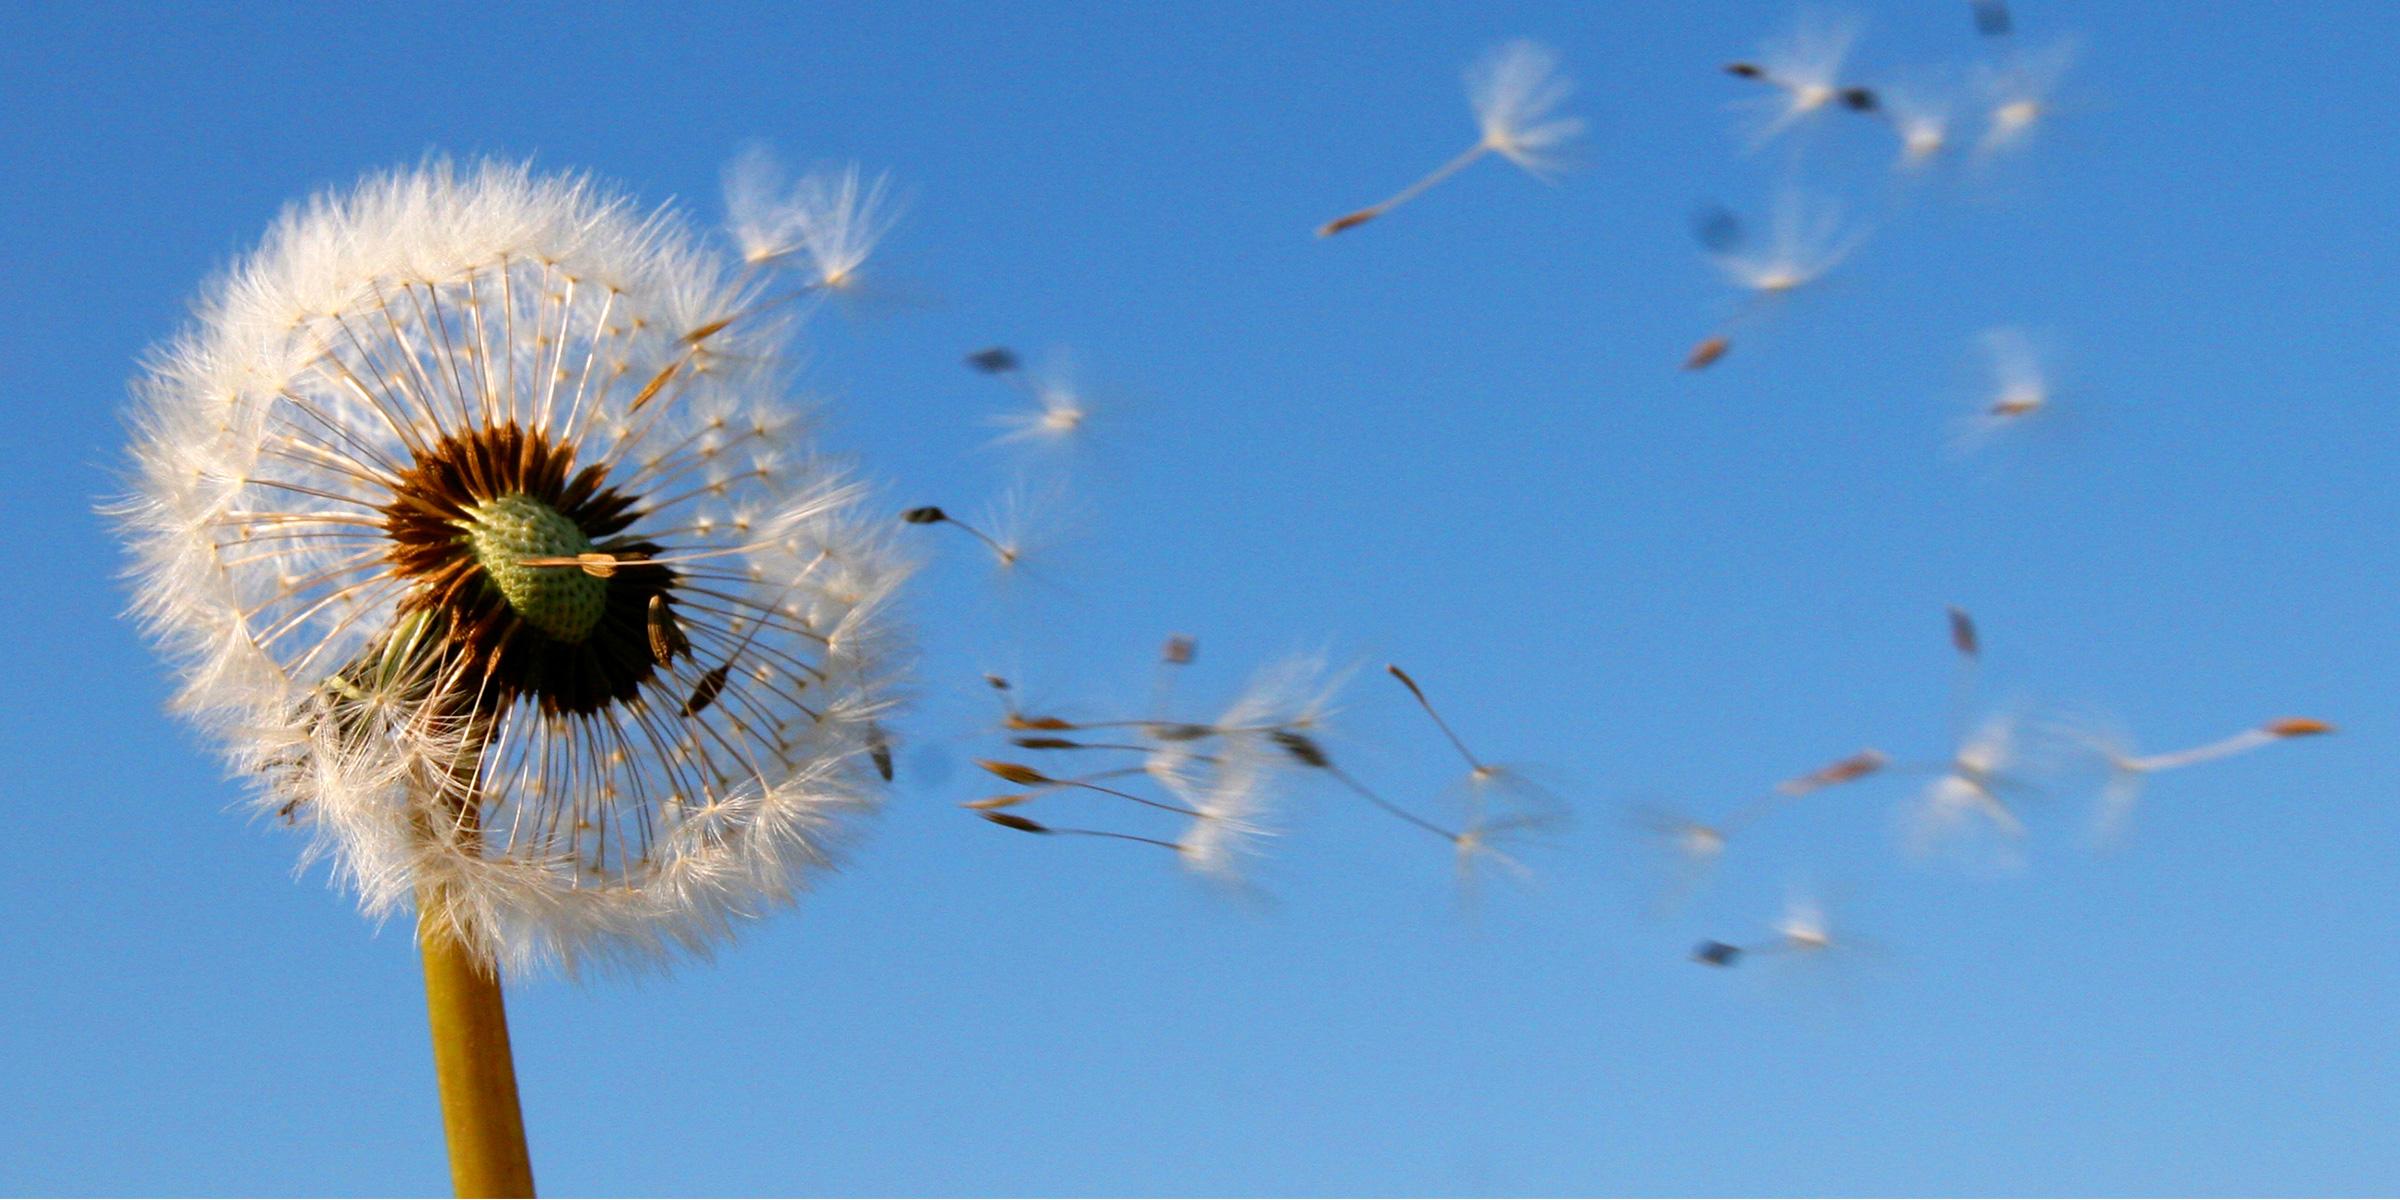 Seeds blown from a dandelion seedhead by the wind